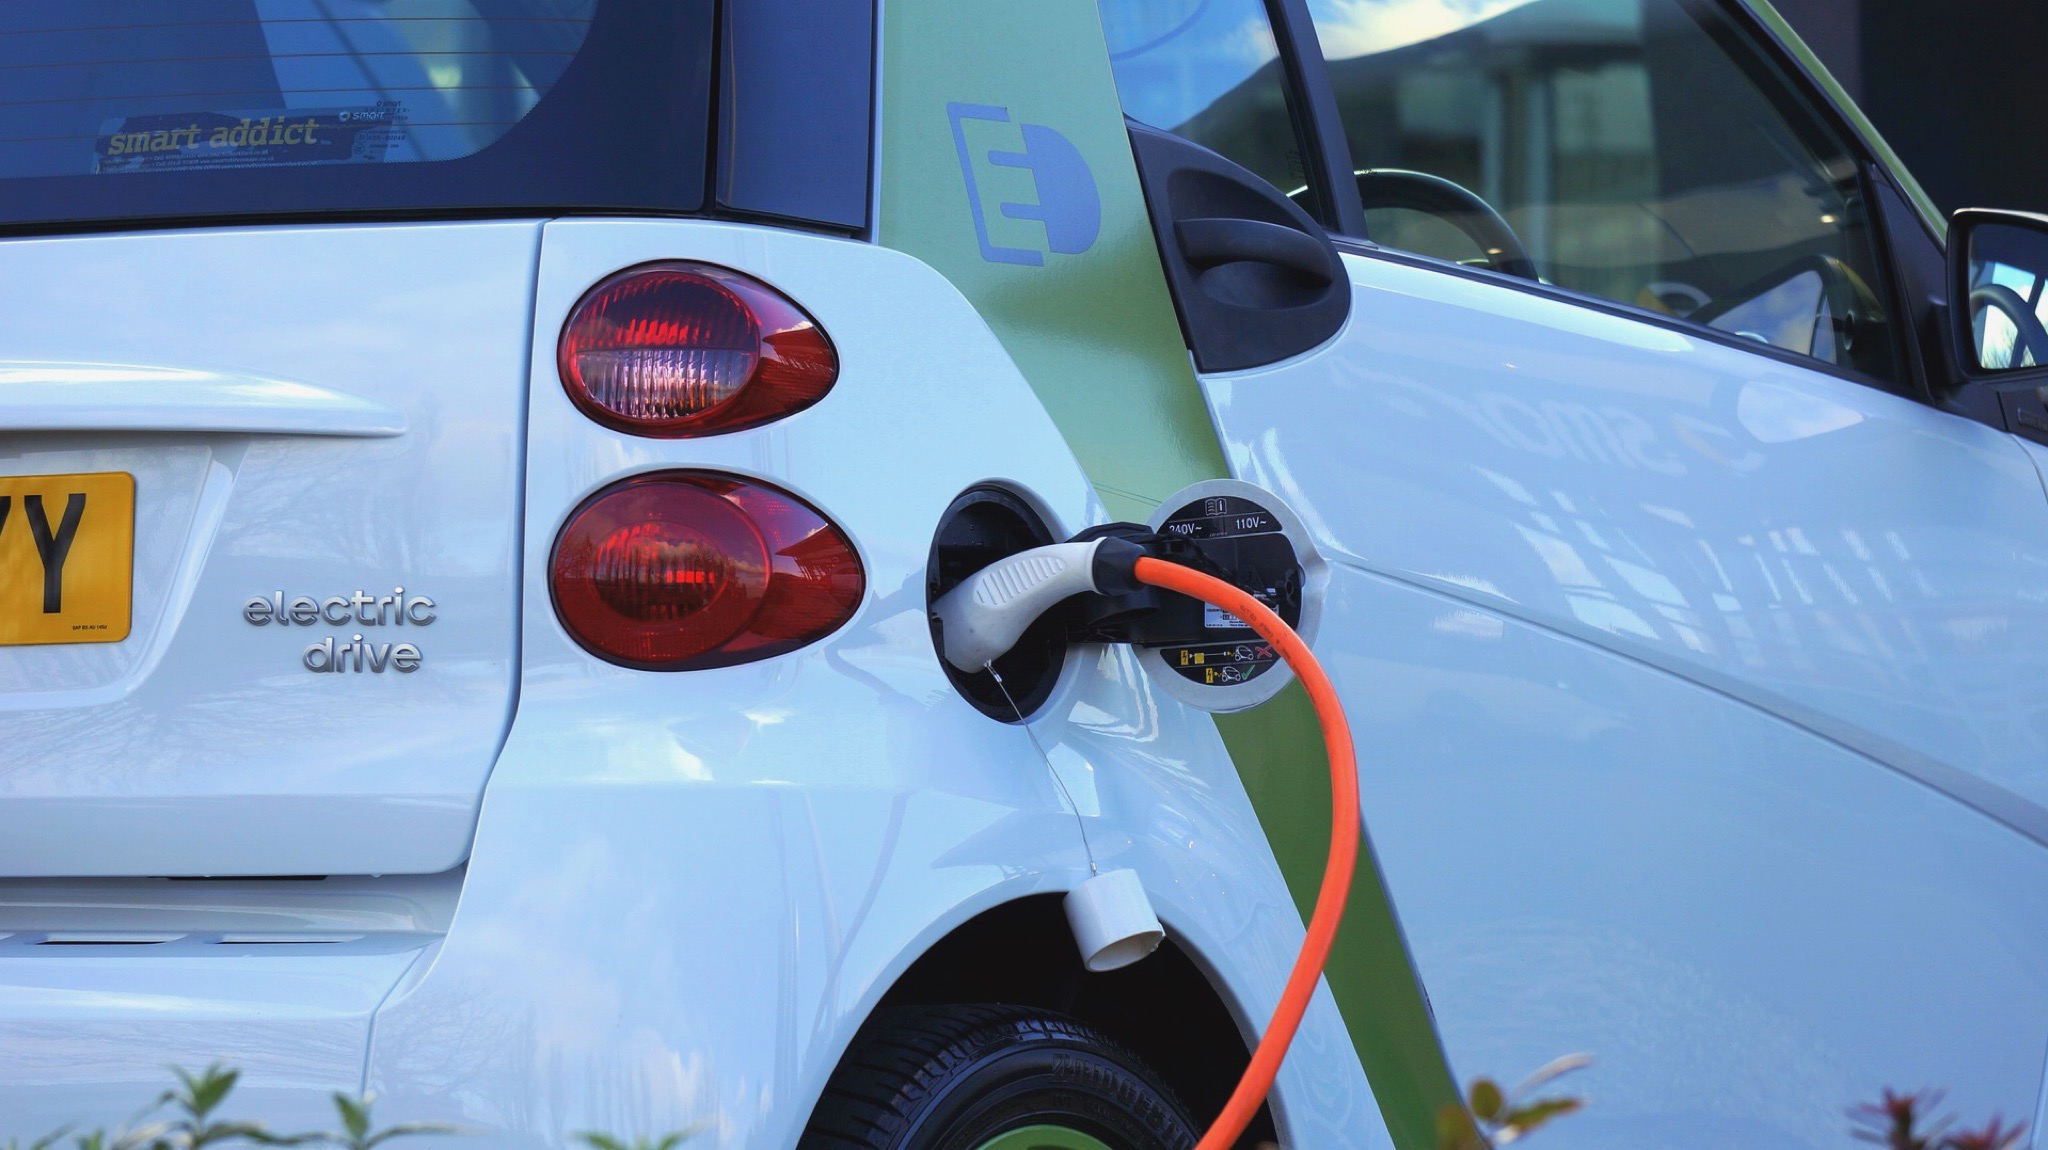 Make it a green new year with an electric vehicle purchase.